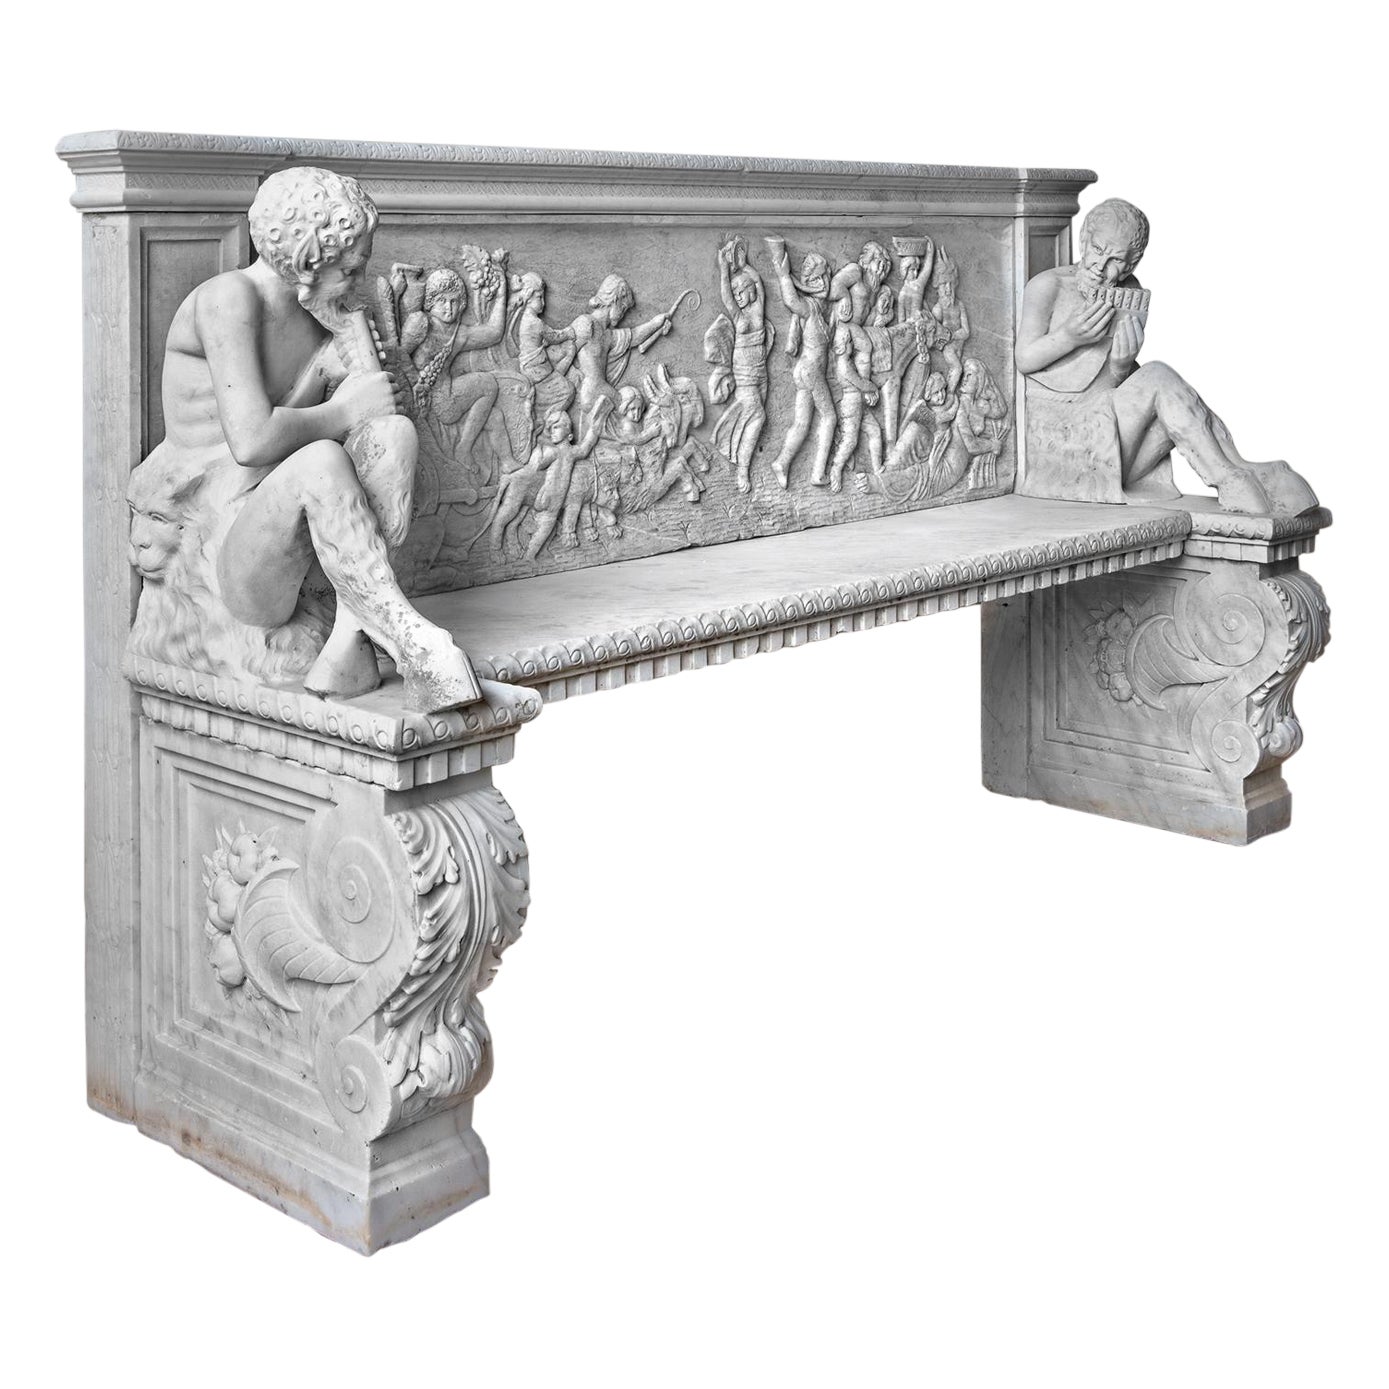 A Rare and Impressive Carved White Marble Neoclassical Bench